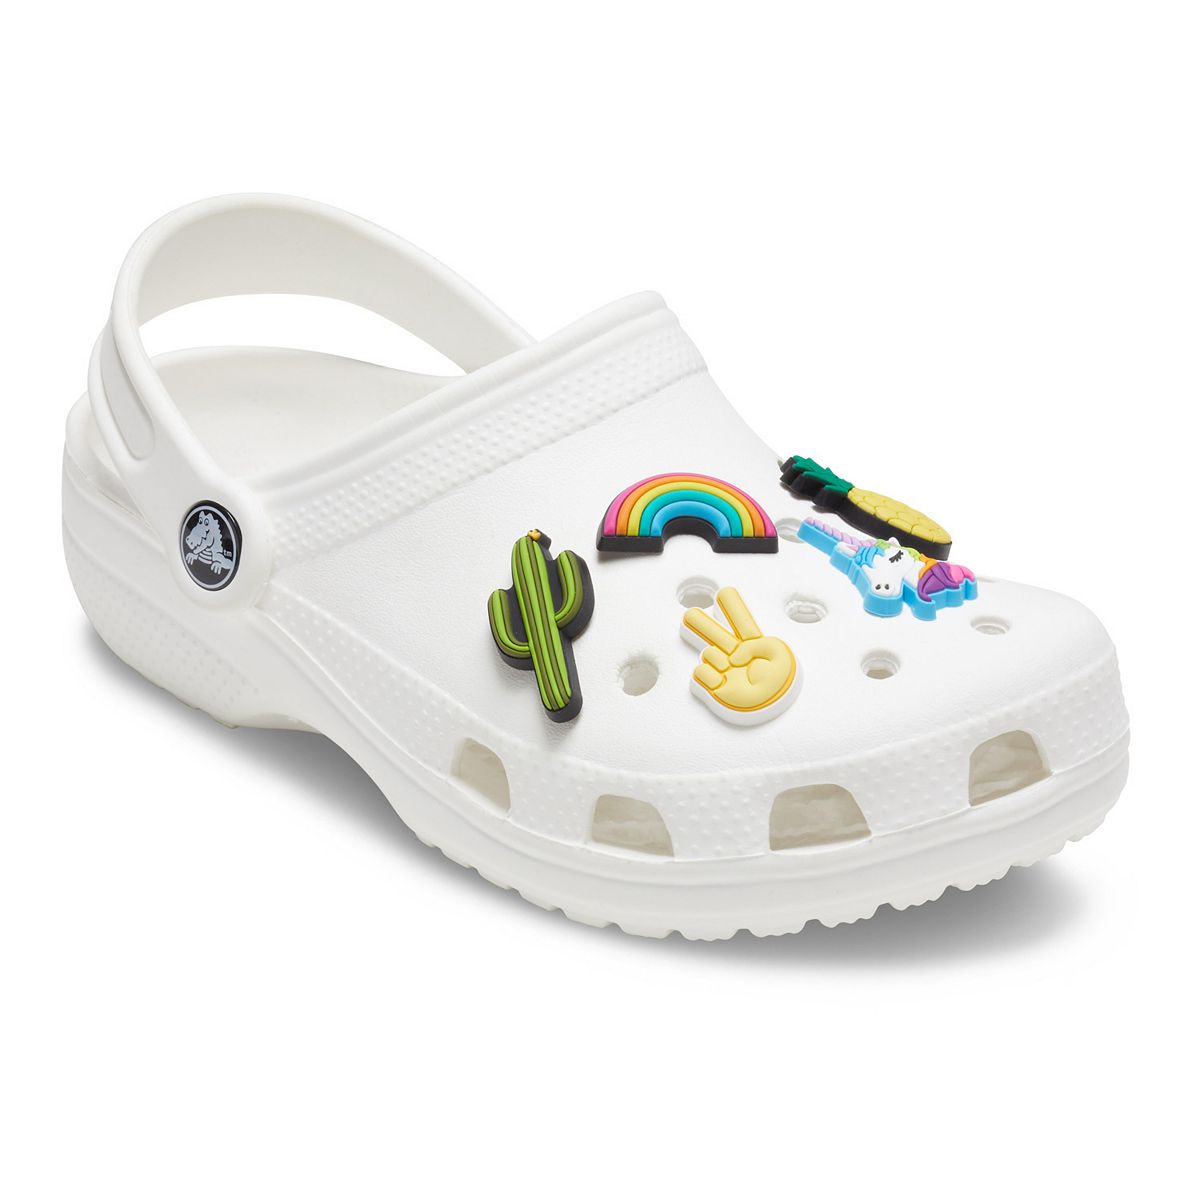 Crocs Jibbitz & Charms: Find Accessories for Your Pair of Crocs Footwear |